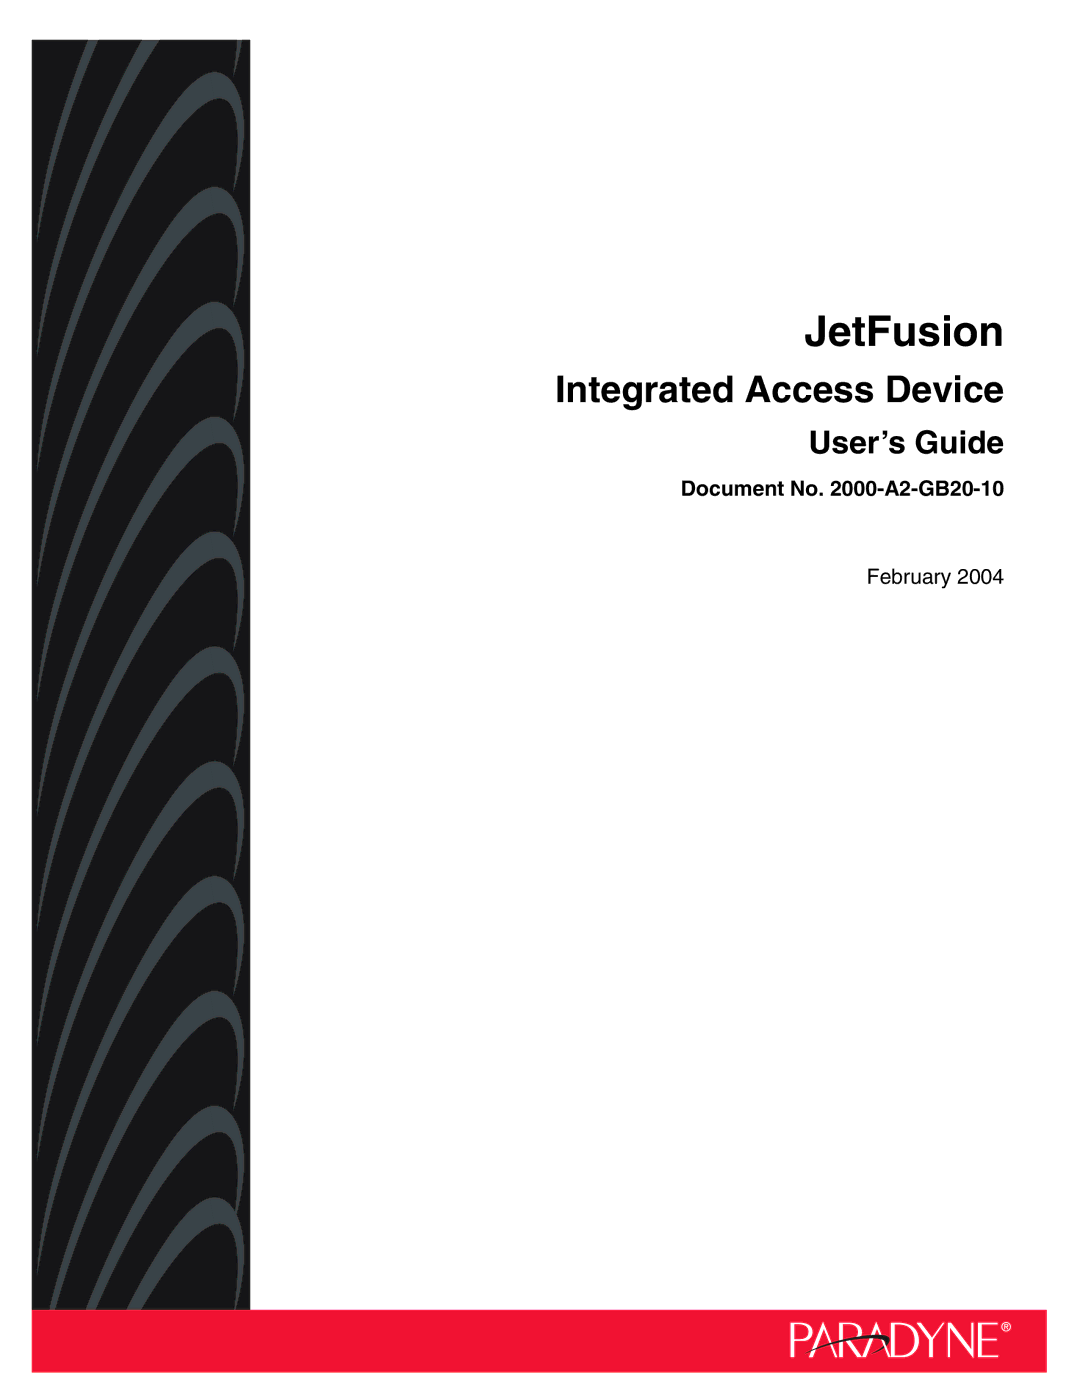 Paradyne JetFusion Integrated Access Device manual Document No -A2-GB20-10 